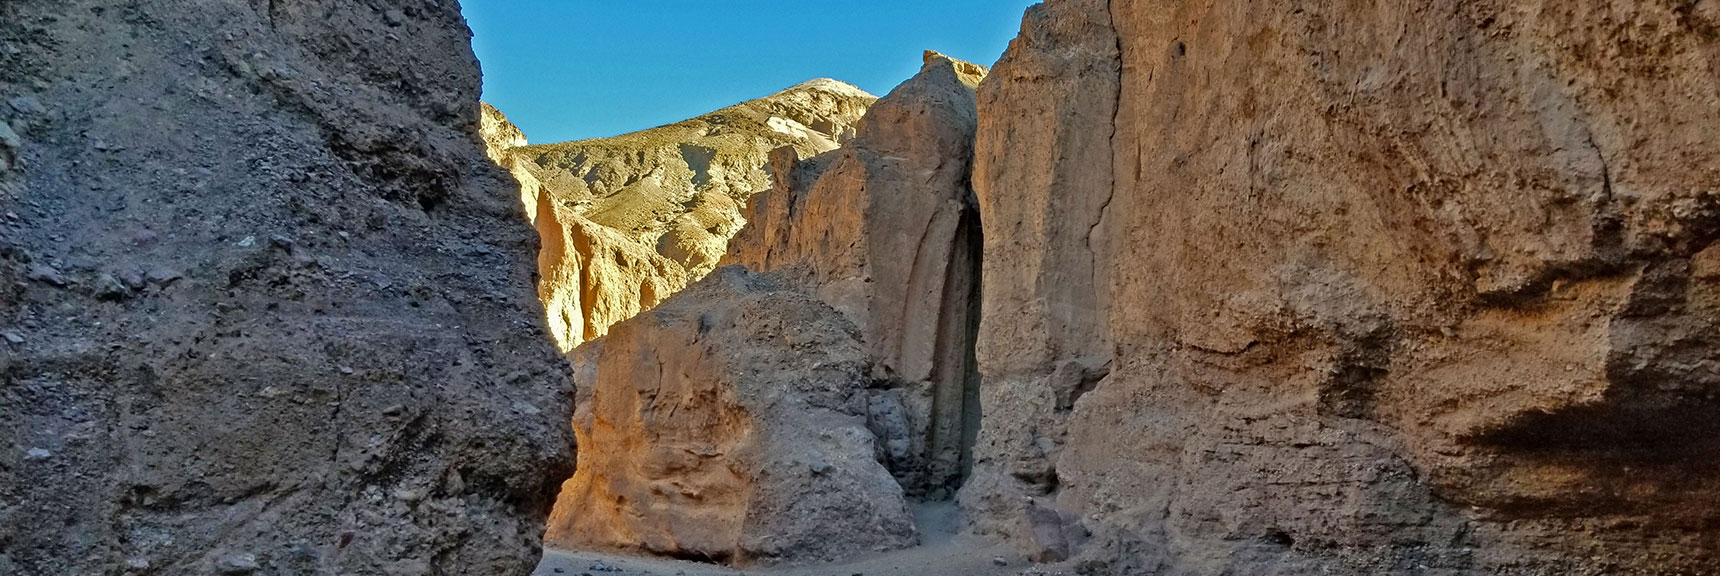 Huge Dry Waterfall Alcove to the Right Just Above the Natural Bridge | Natural Bridge Canyon | Death Valley National Park, California